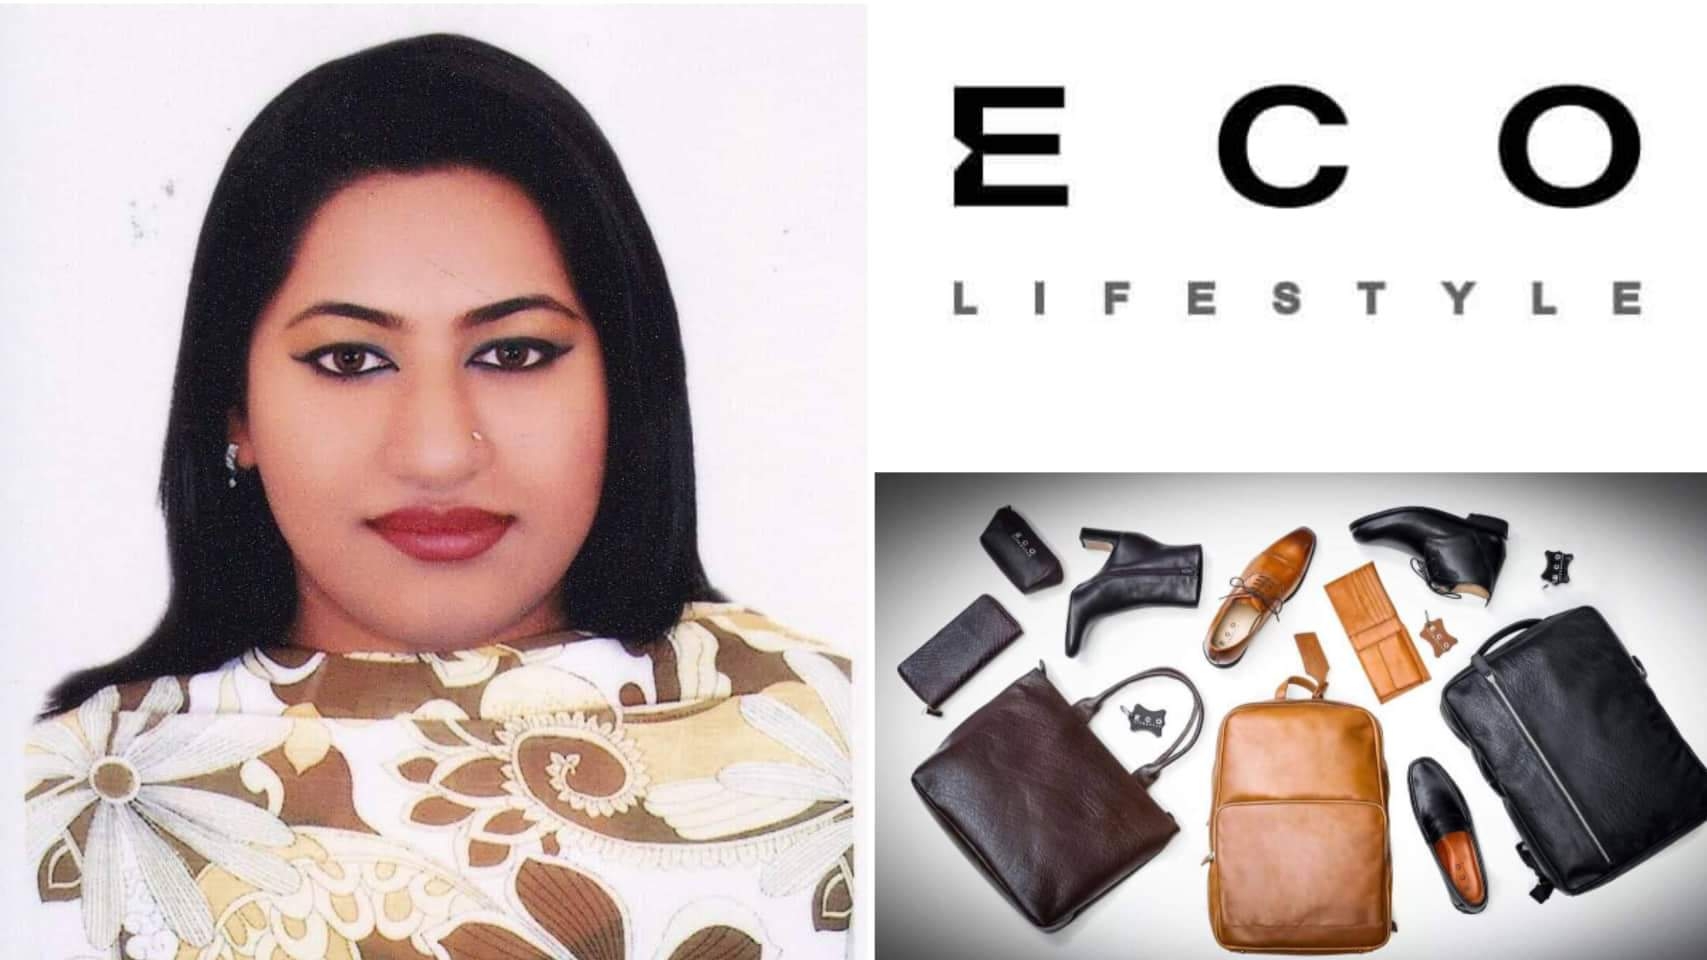 This is the story of Fawzia Abedin's successful entrepreneur